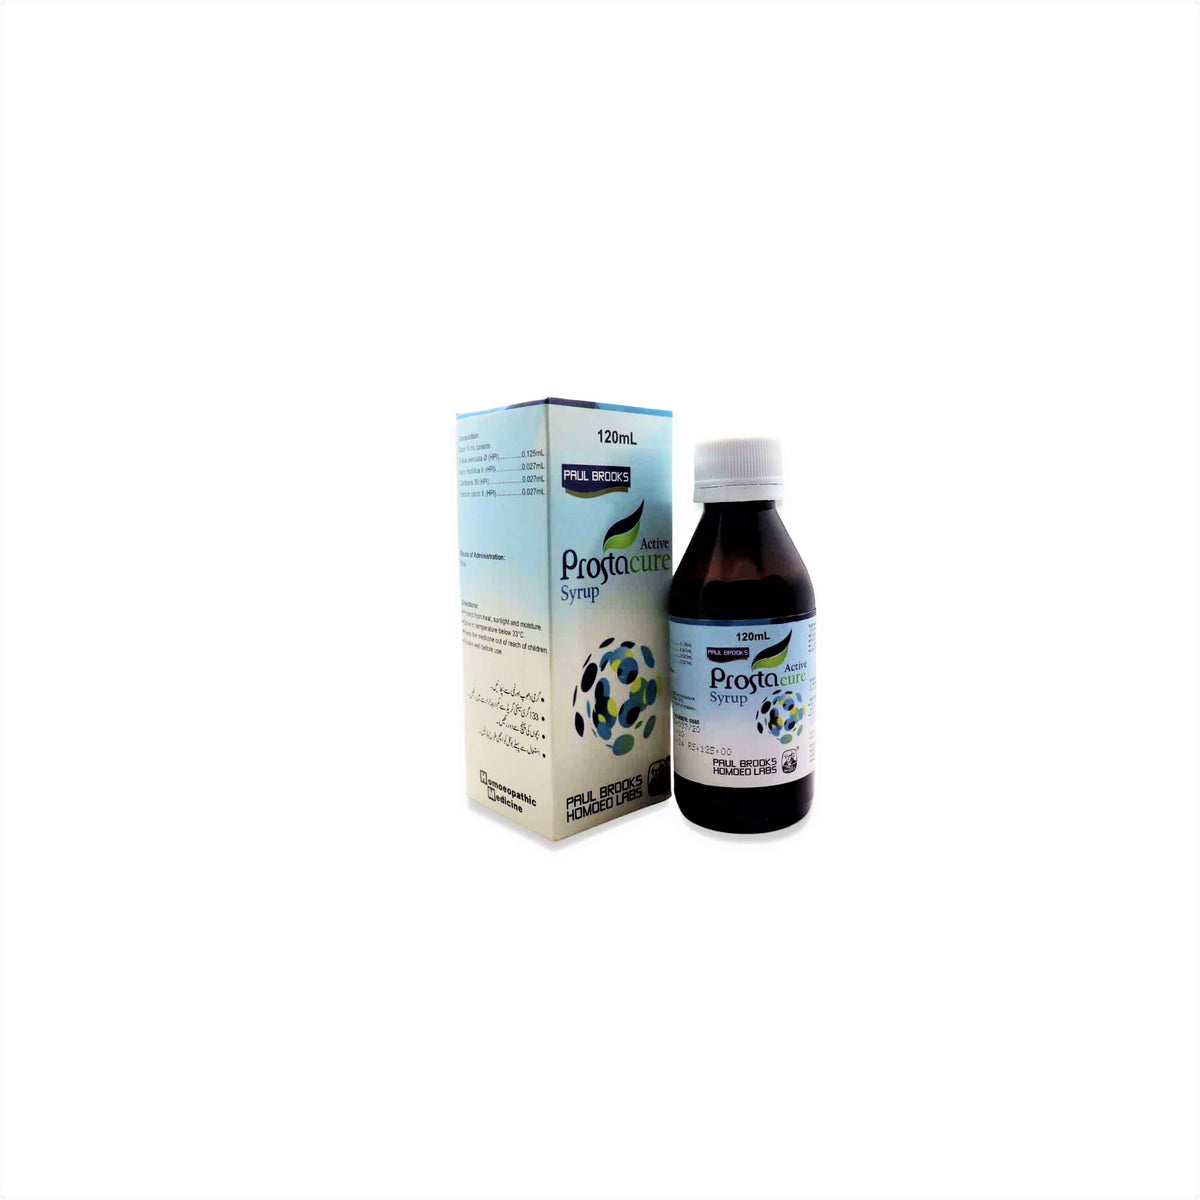 Proscon (Prostacure) Syrup & Capsule